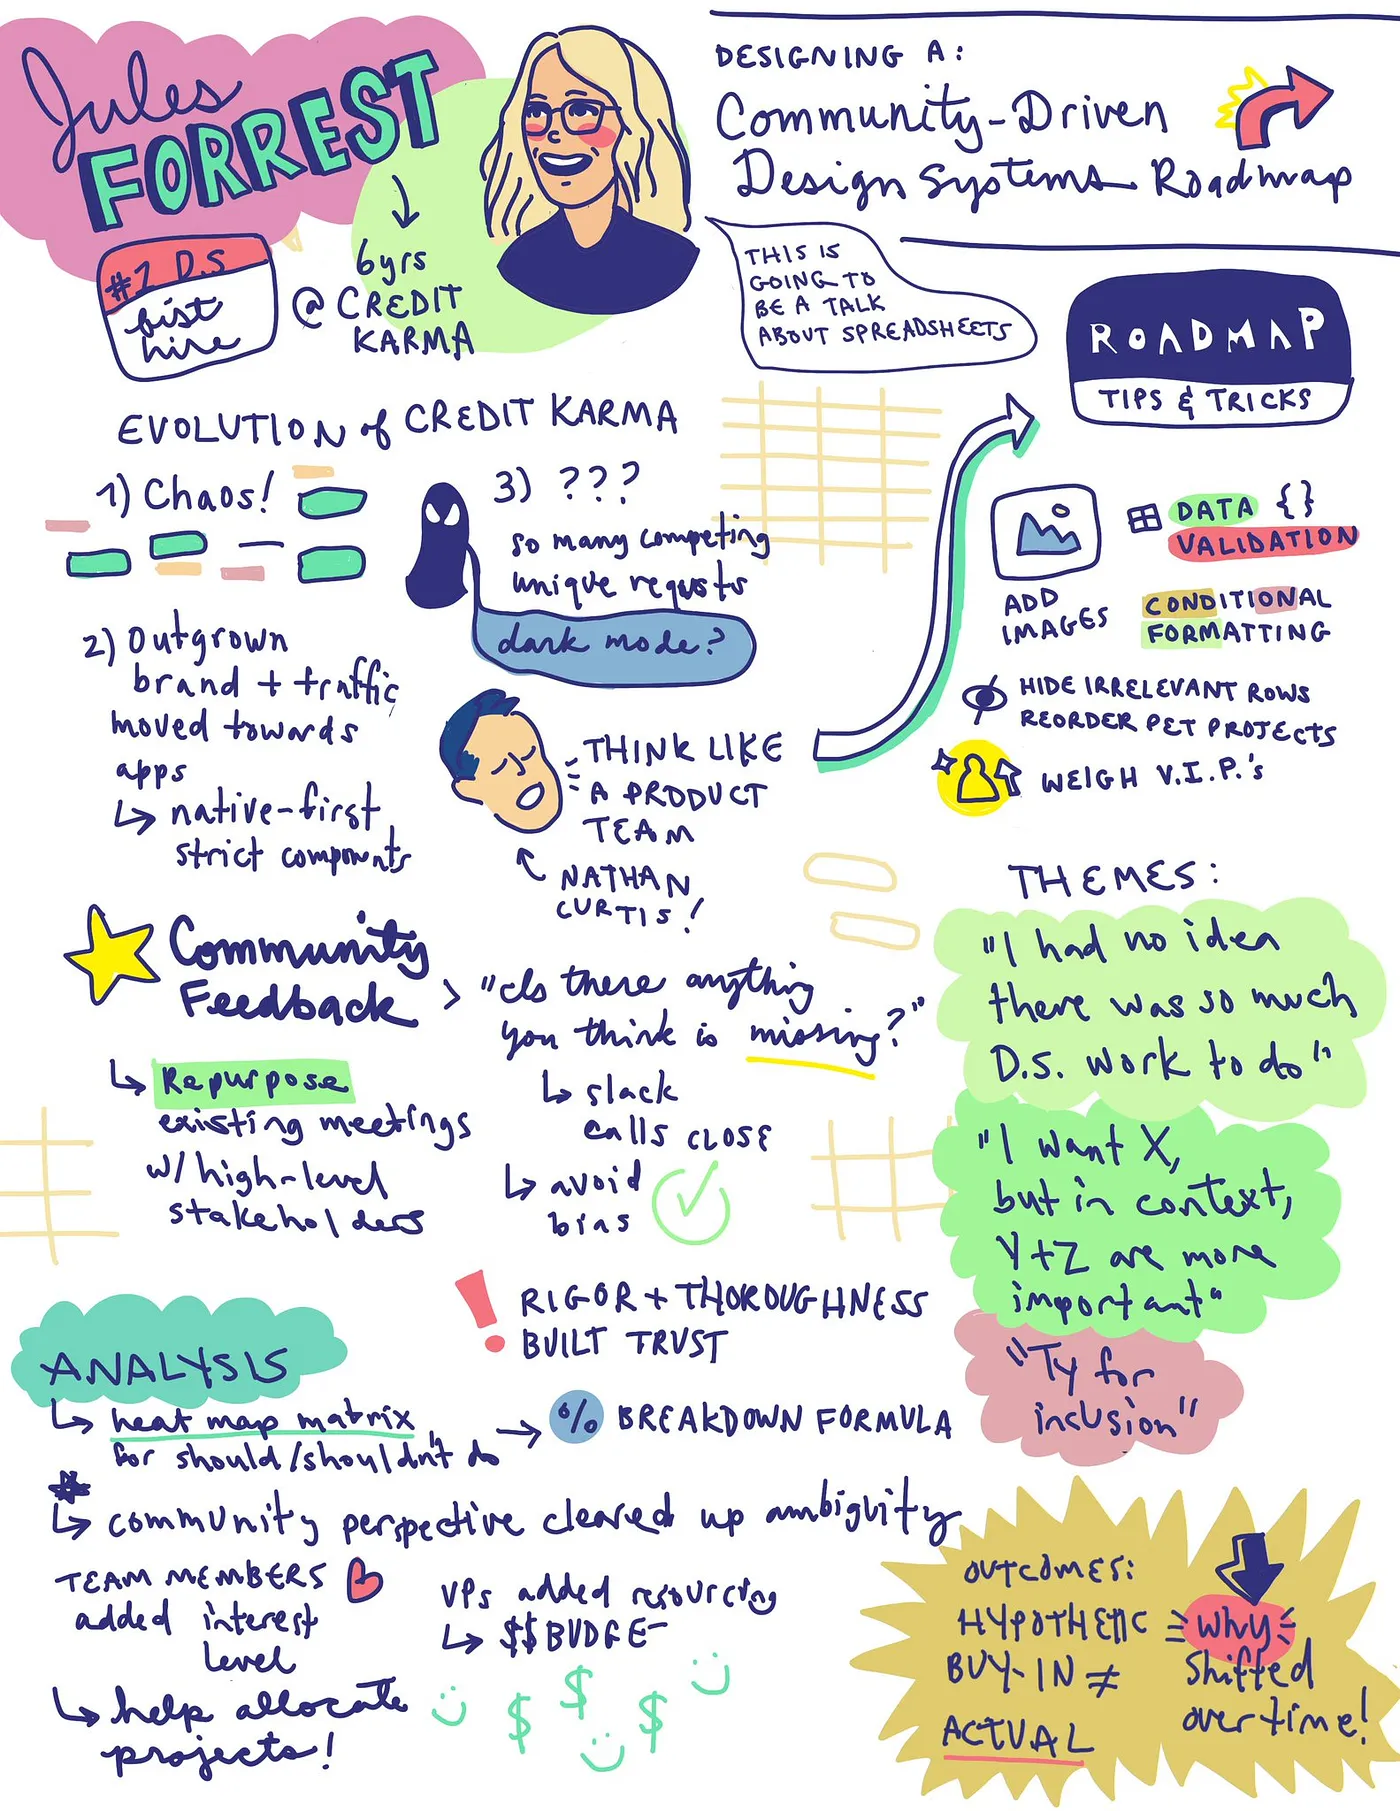 Sketchnote of Jules Forrest's talk by @RaqelDesigns